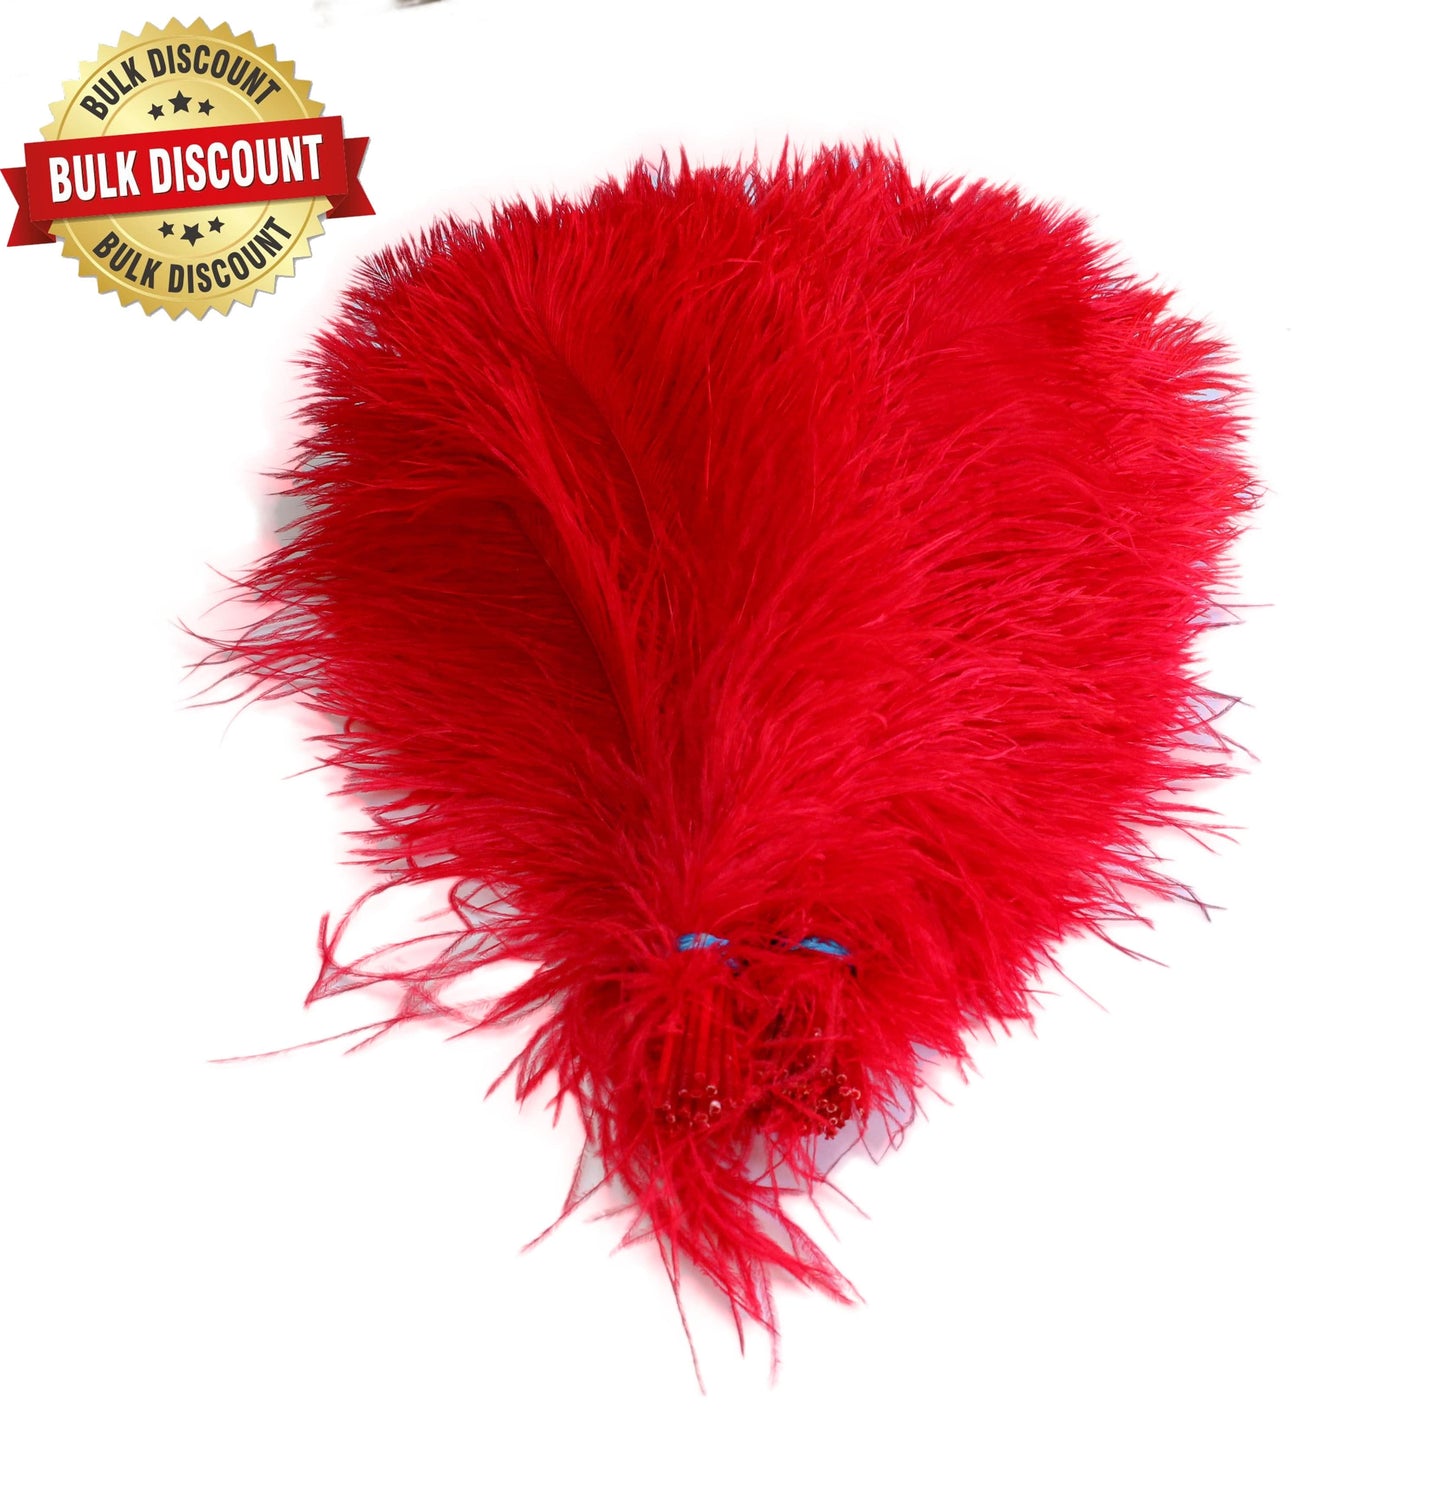 BULK 1/2lb Ostrich Feather Tail Plumes 15-20" (Red) - Buy Ostrich Feathers